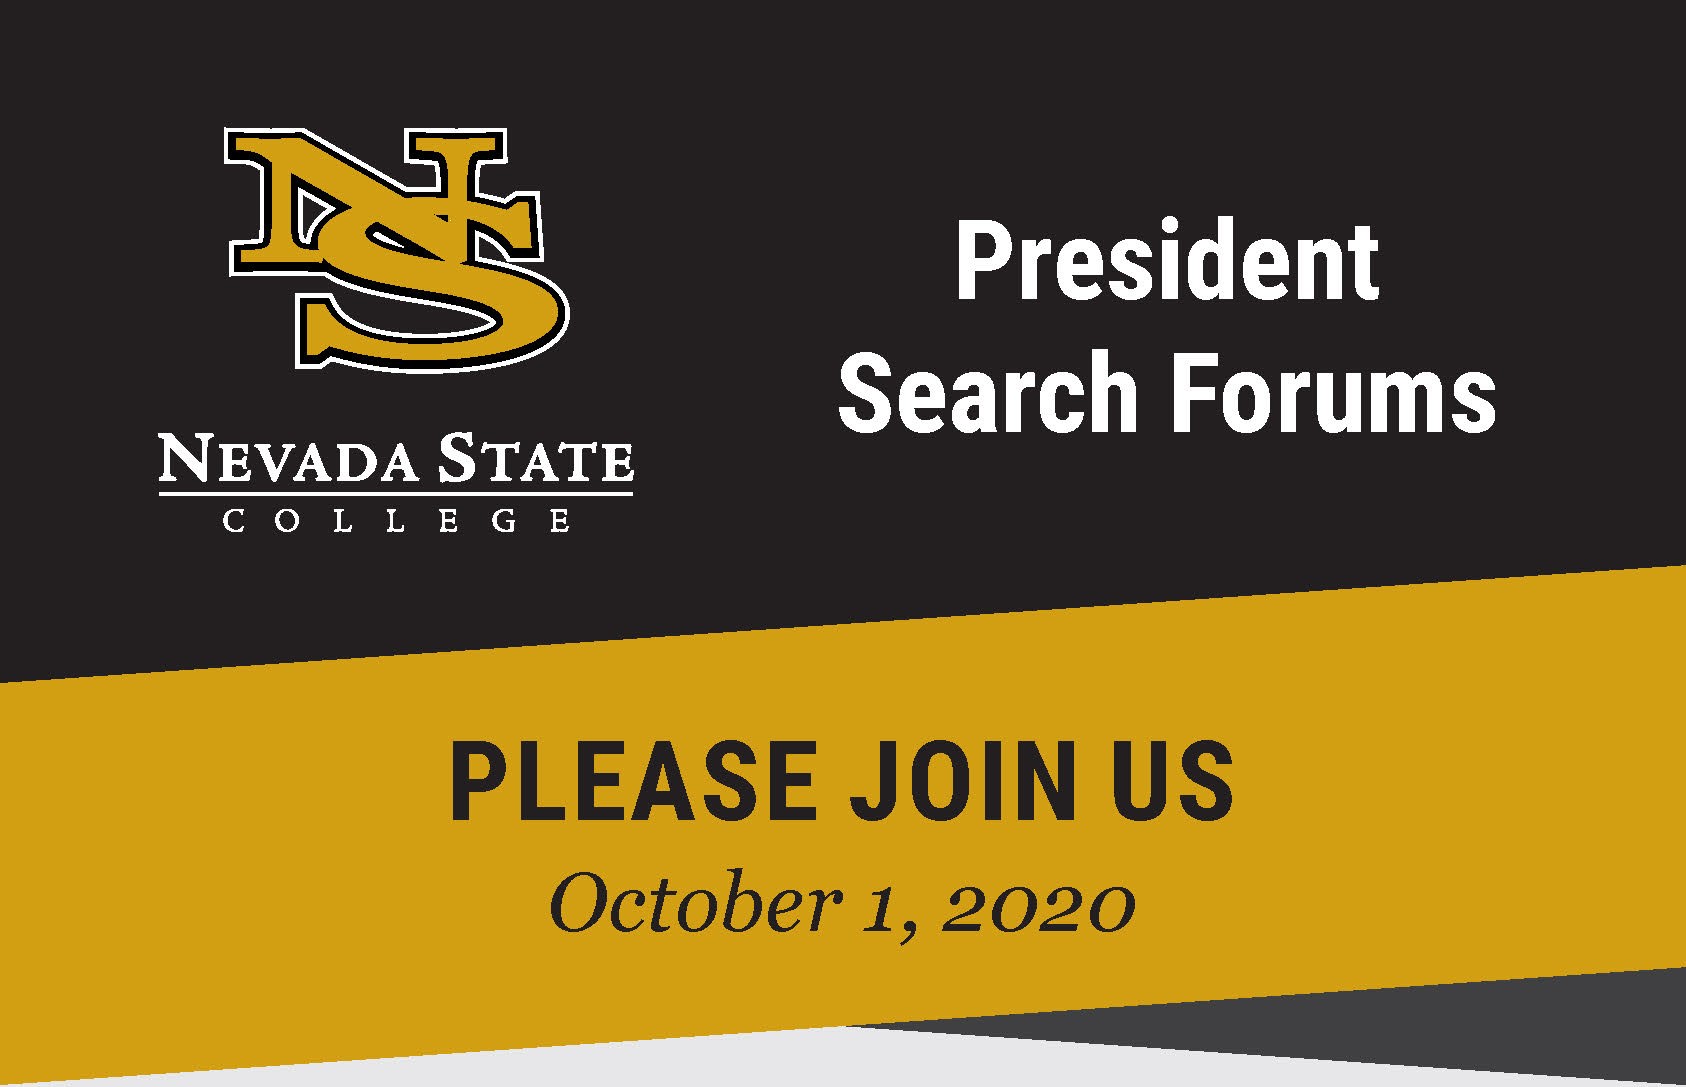 President Search Forms October 1, 2020